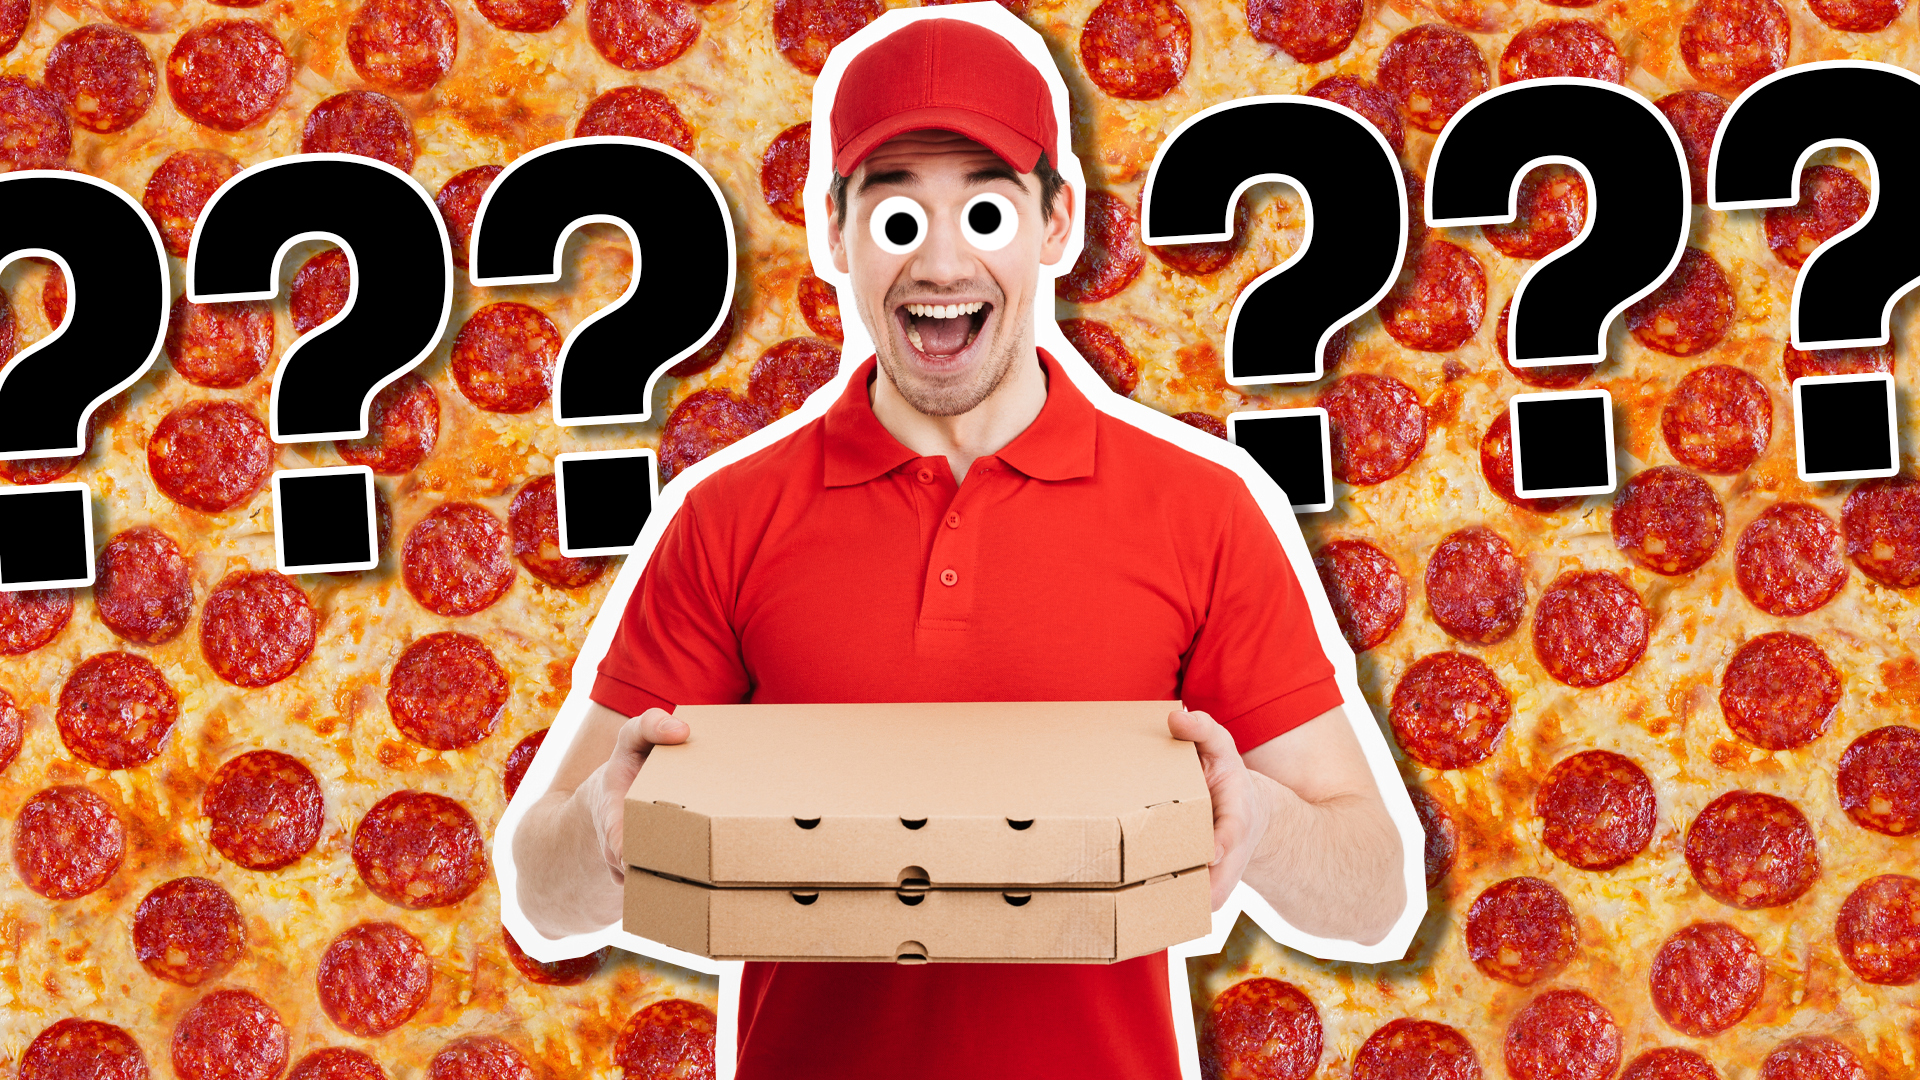 What pizza am I?